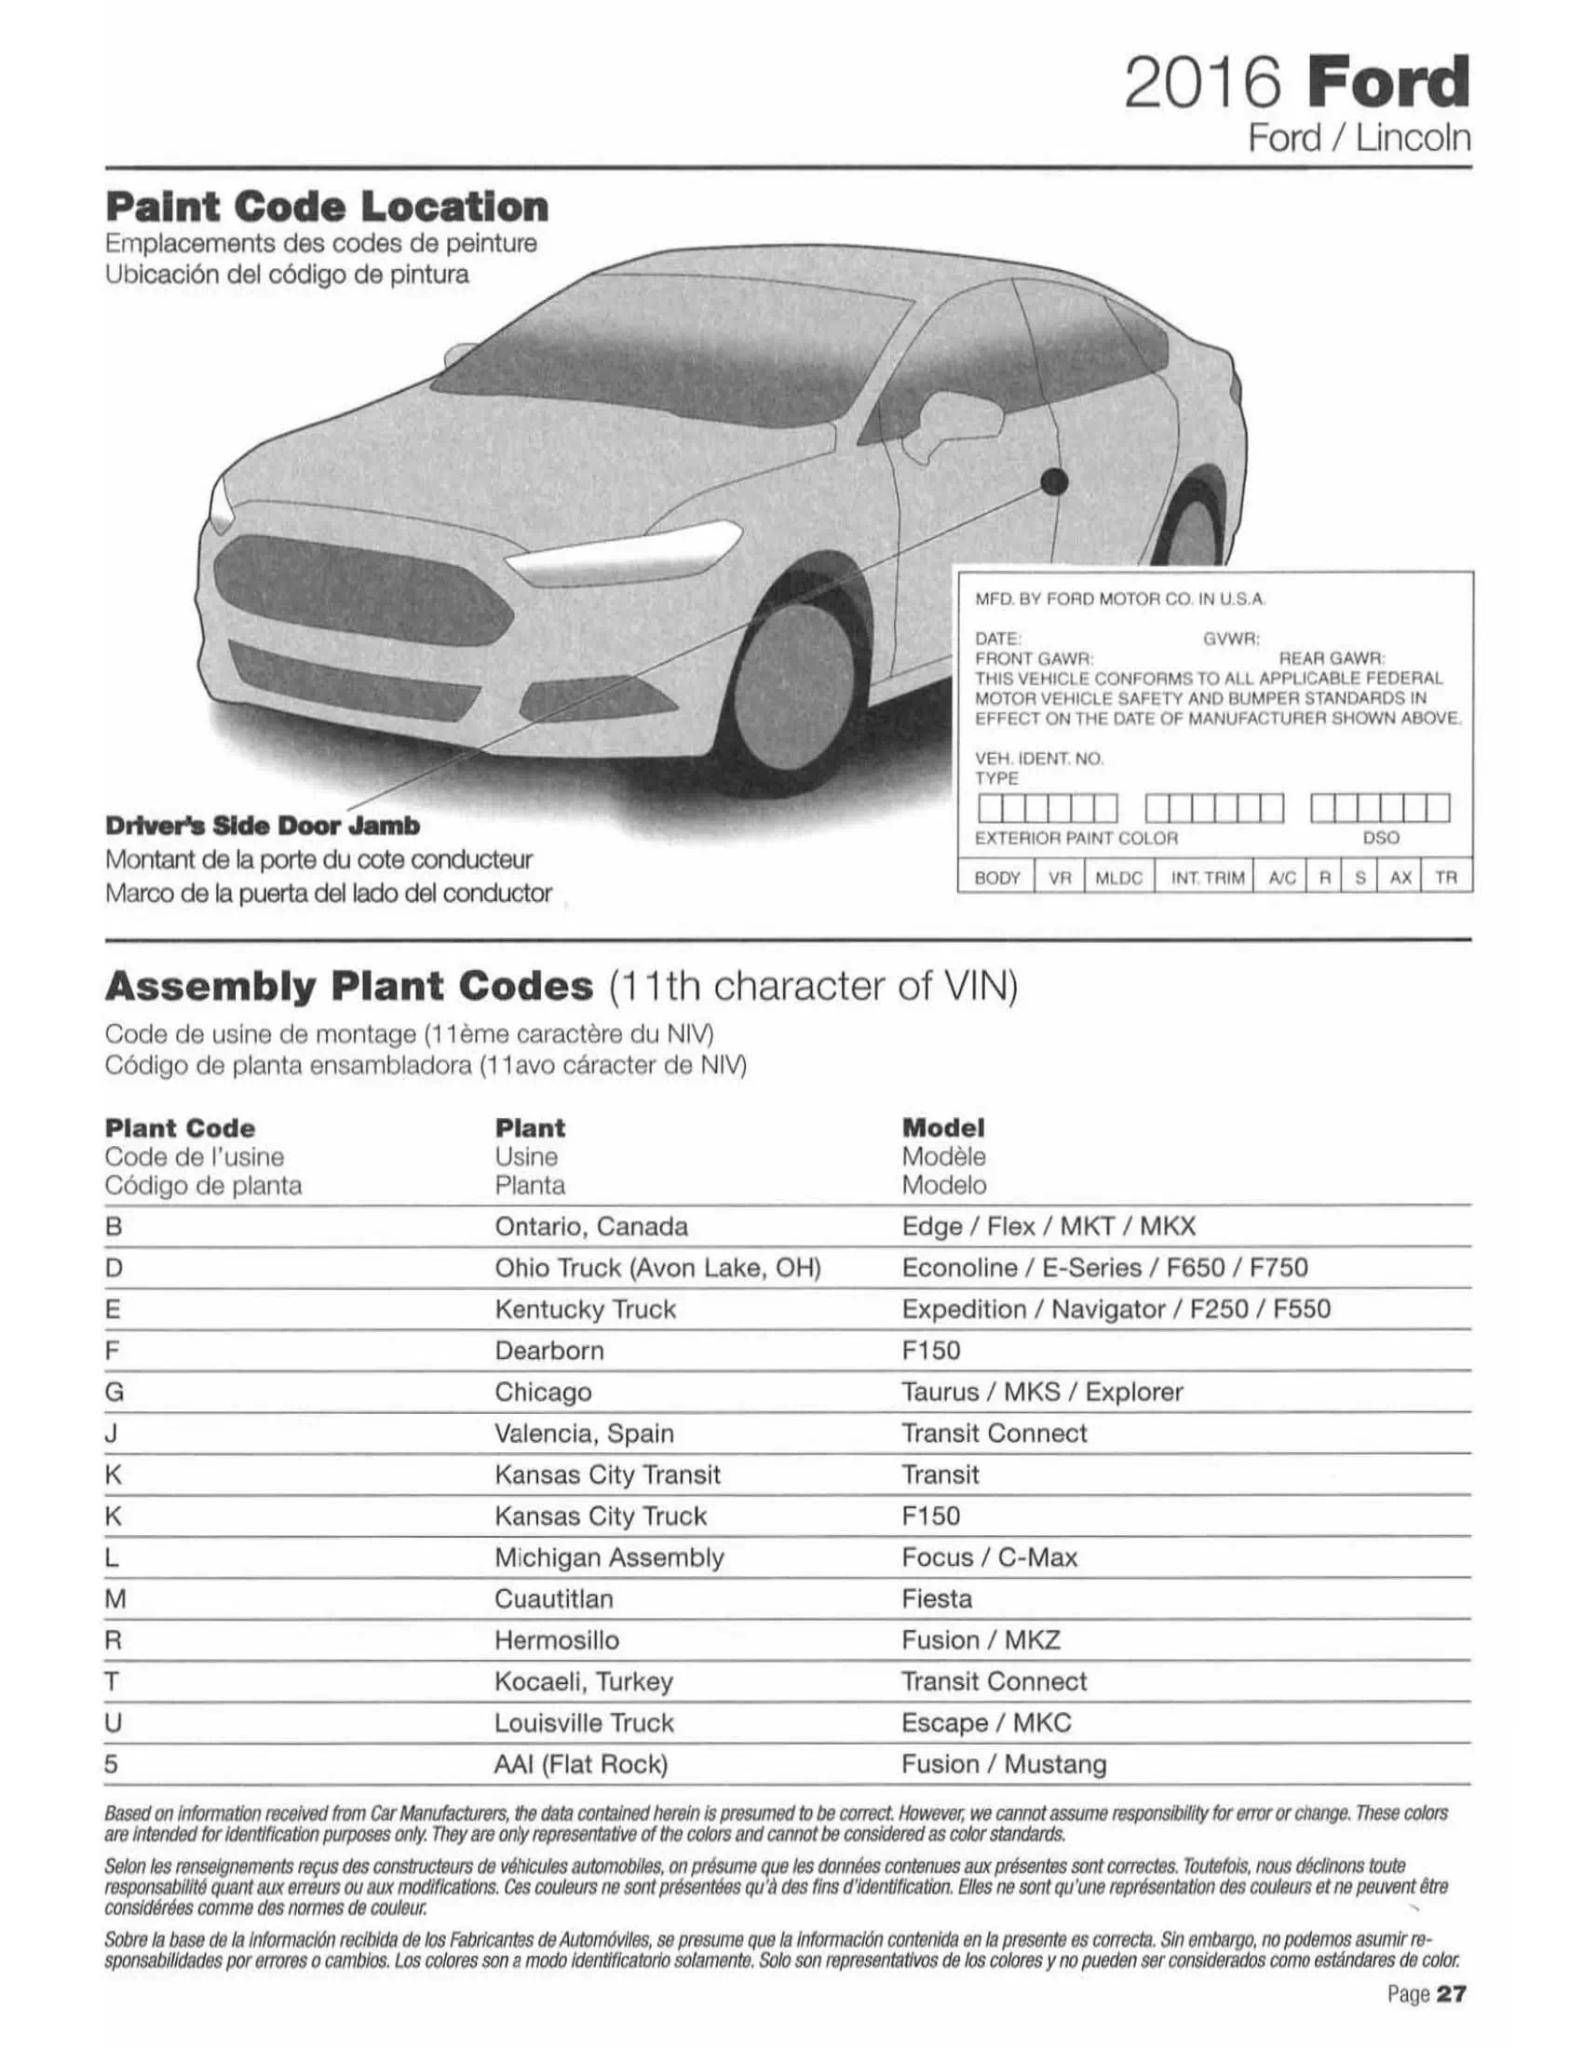 2016 ford and lincoln paint code location